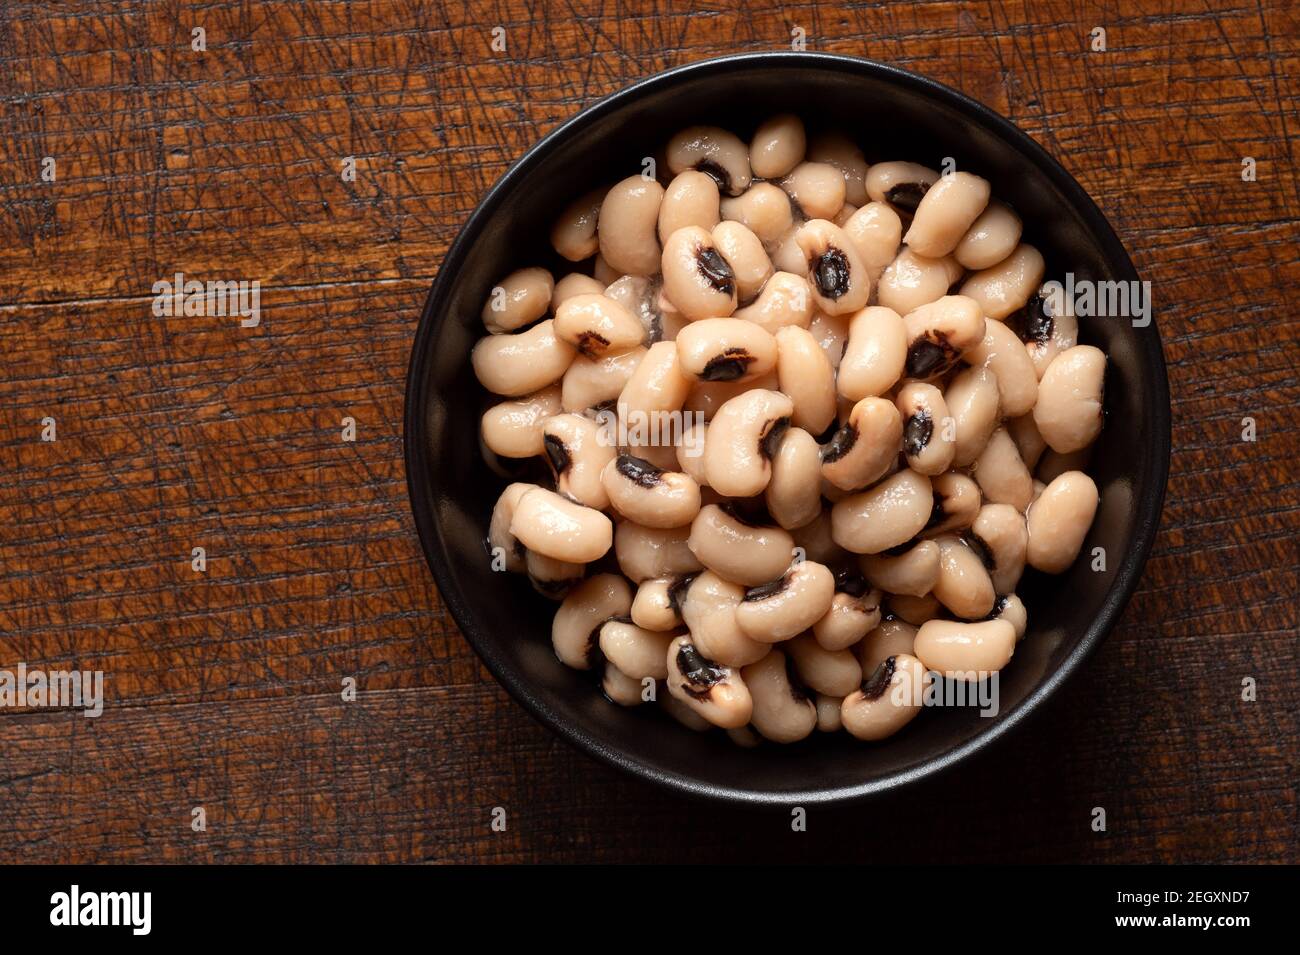 Cooked black-eyed beans in a black ceramic bowl isolated on wood. Top view. Stock Photo